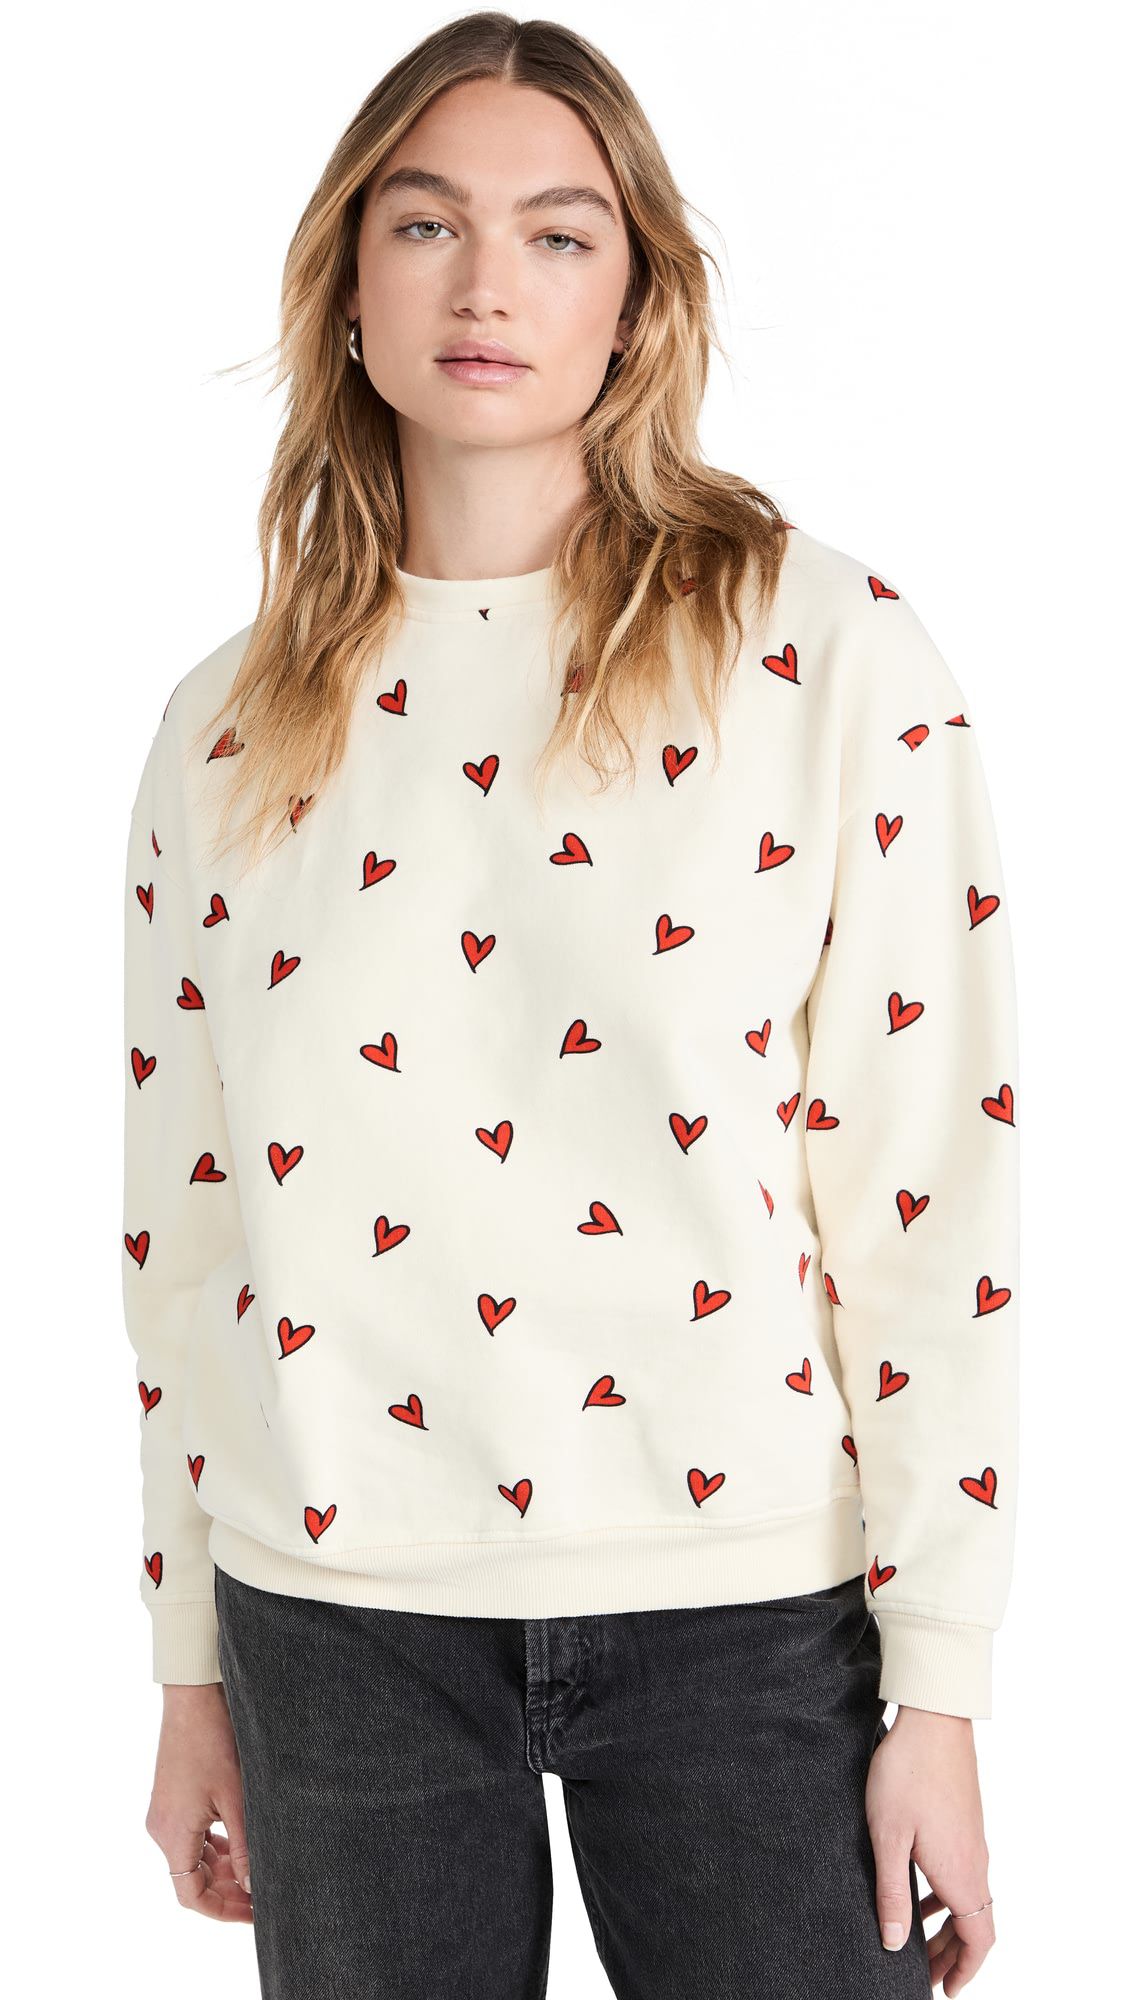 Made in china Heart pattern high neck casual hoodie top